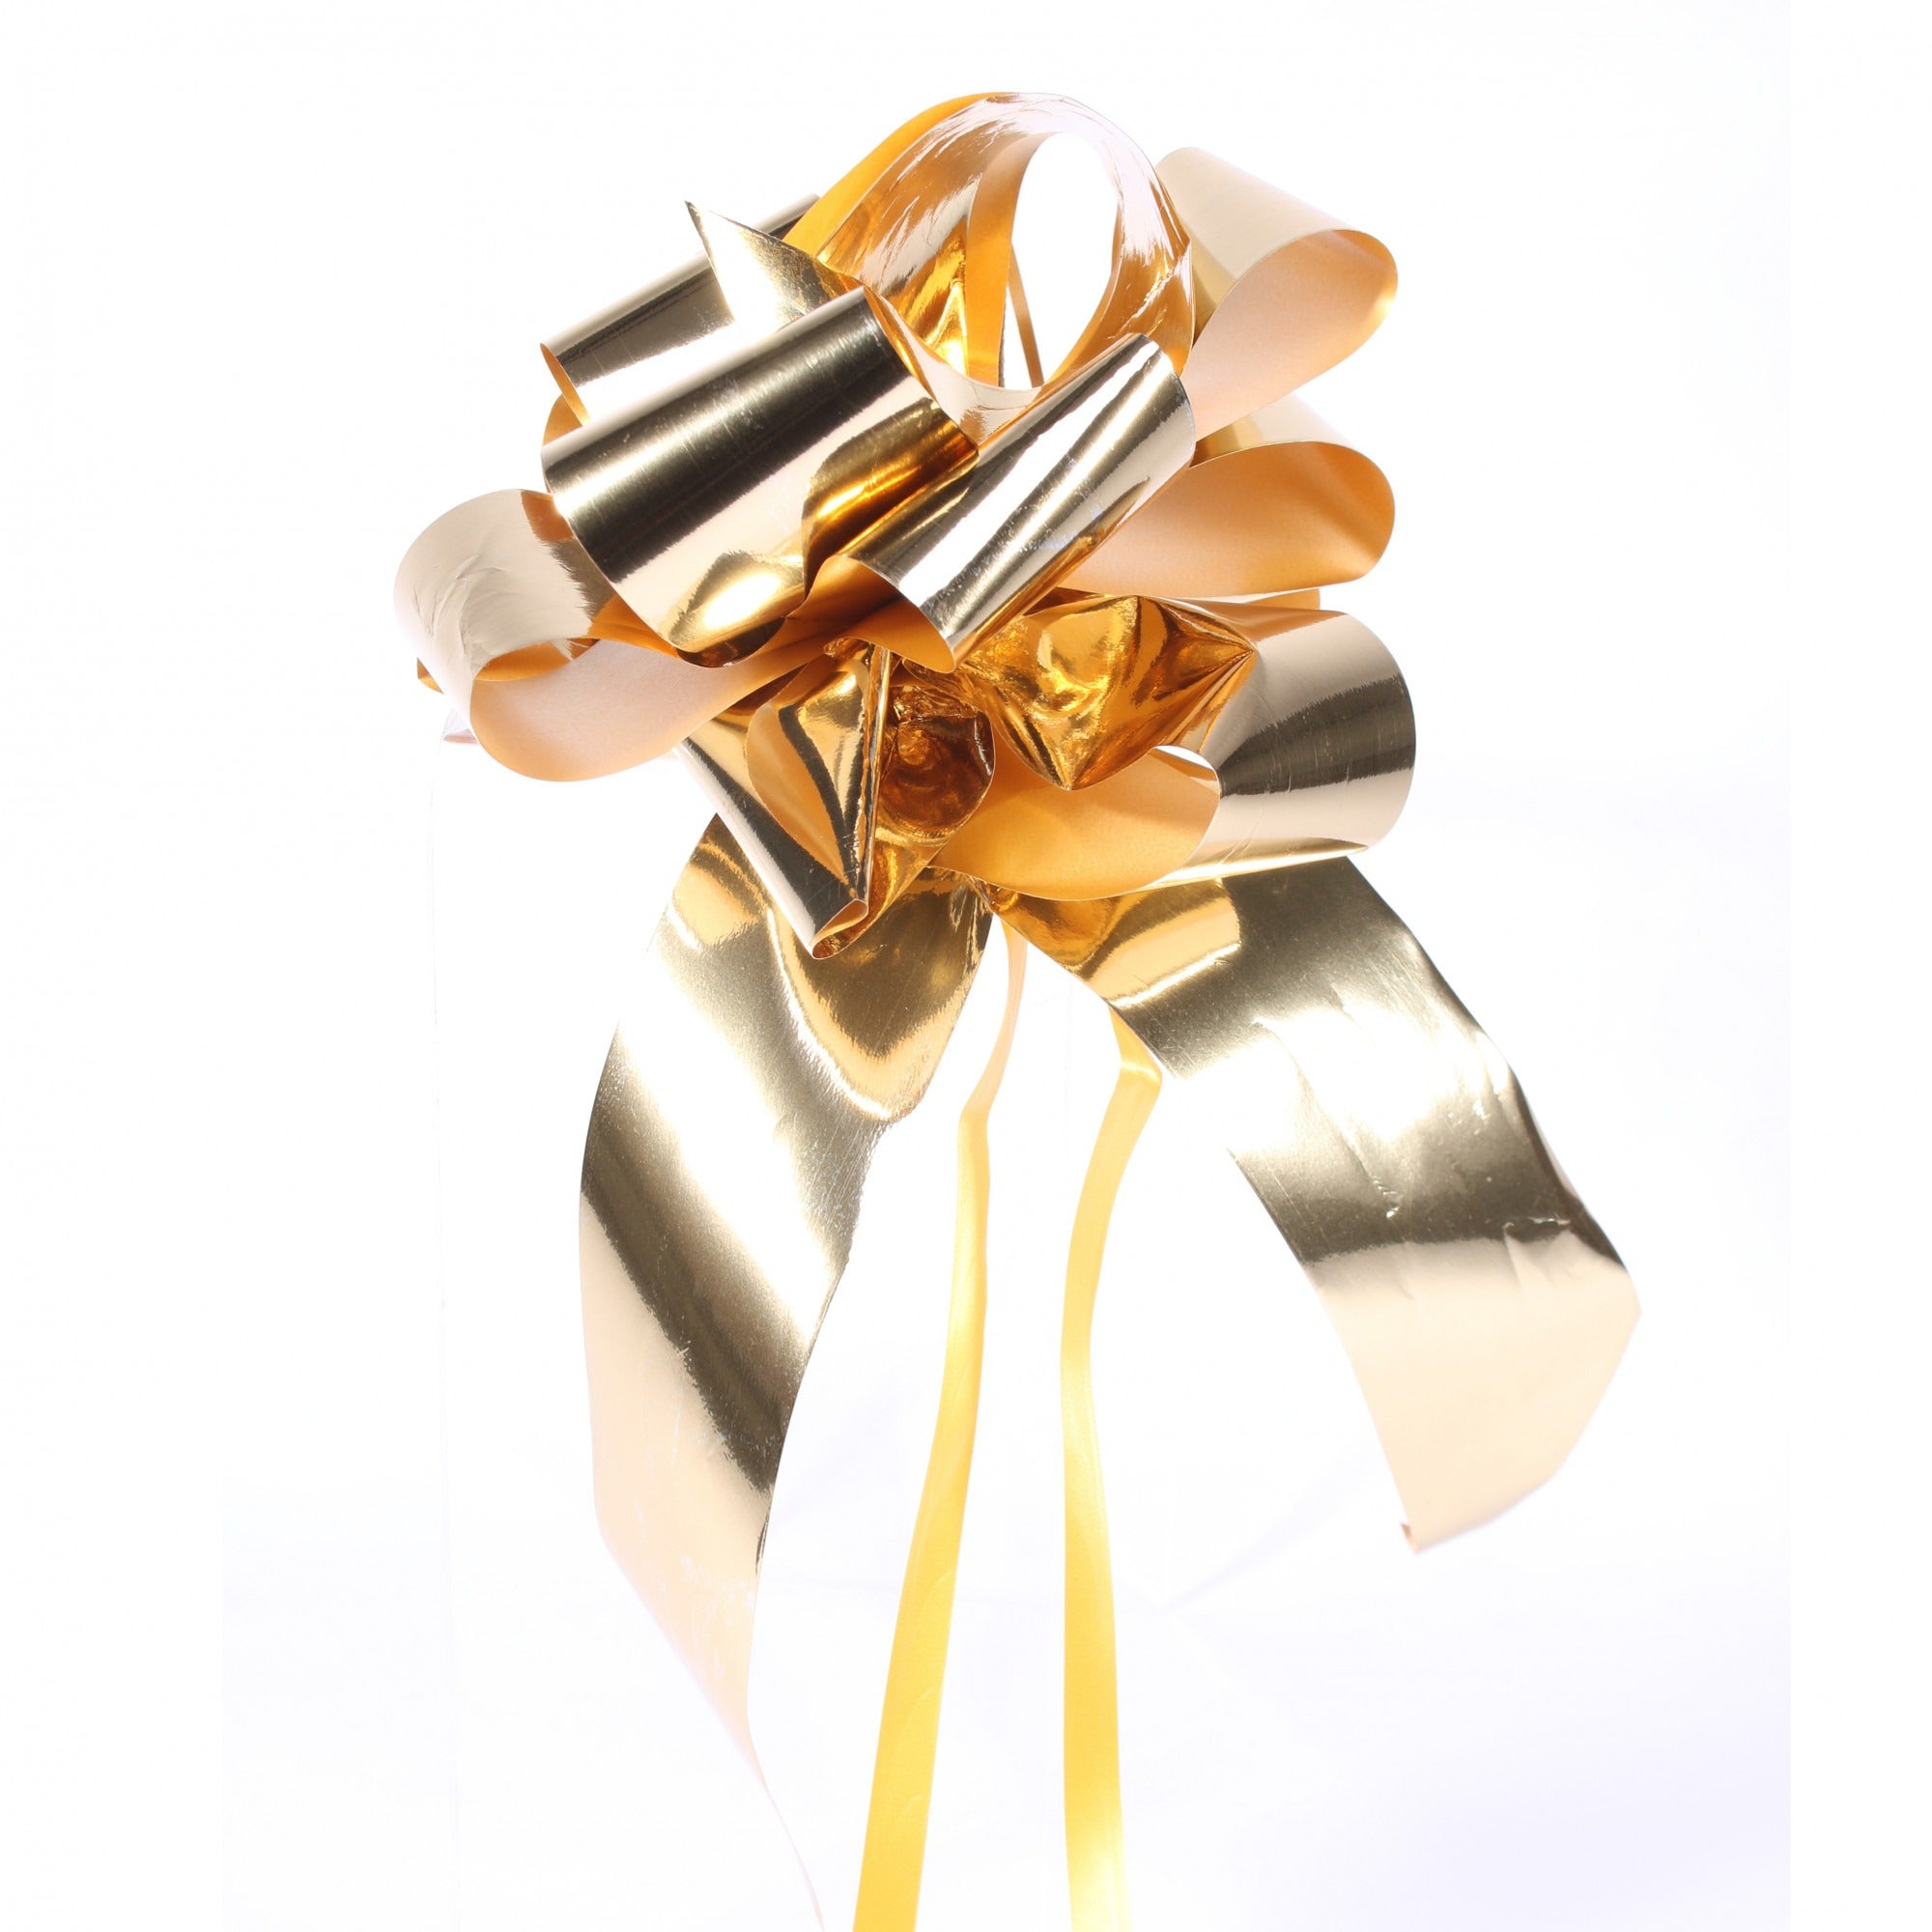 View Metallic Gold Pull Bow 50mm information